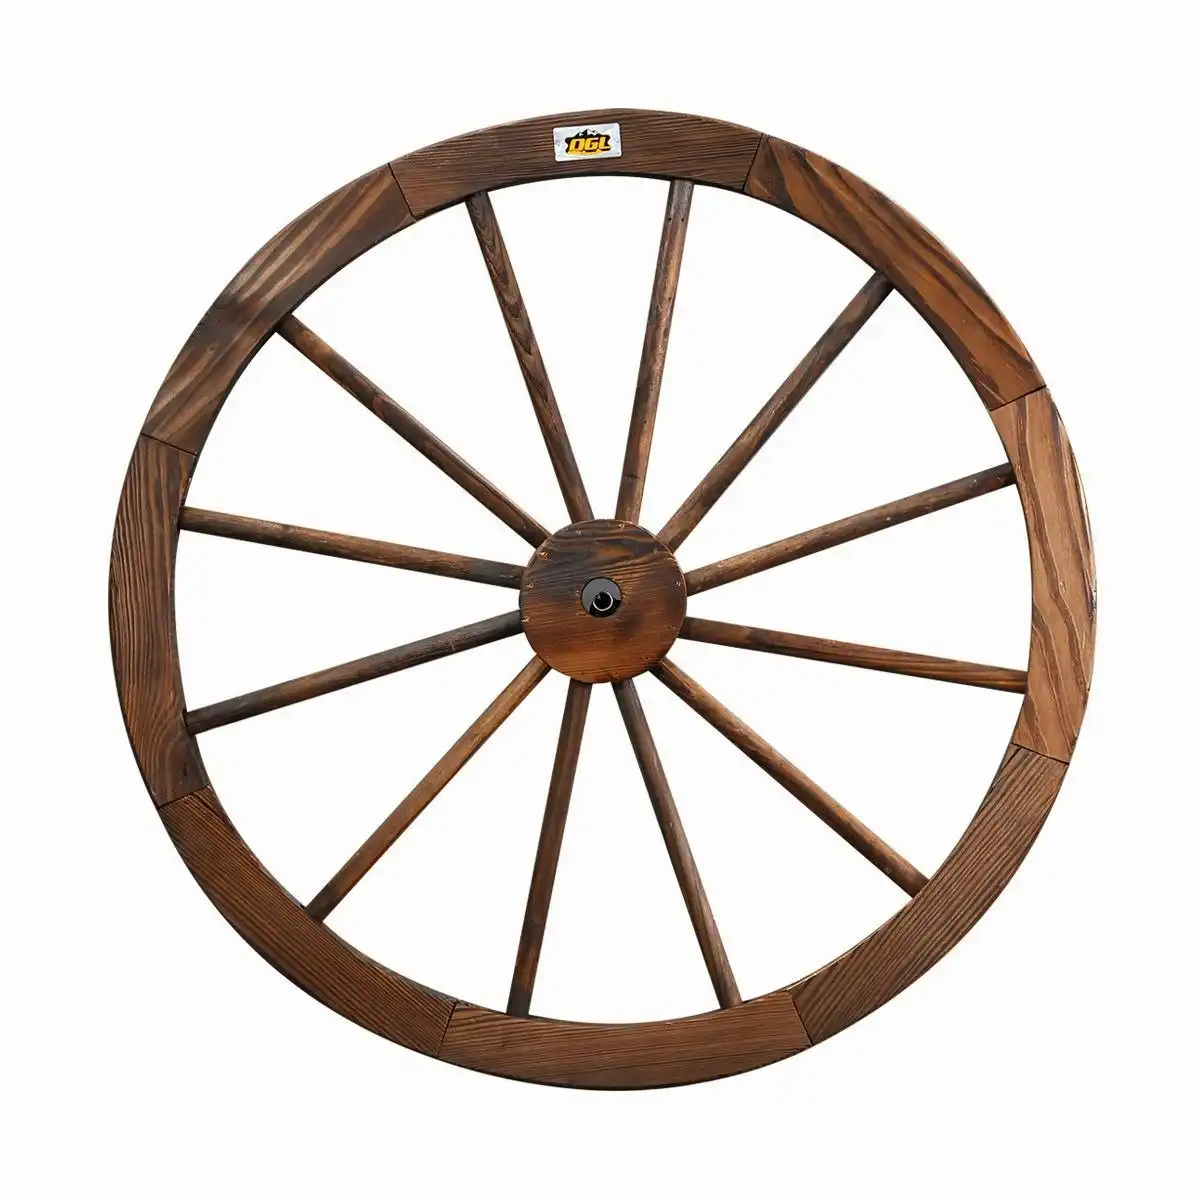 Ausway Wooden Wagon Wheel Outdoor Decoration Garden Ornaments 30" Timber